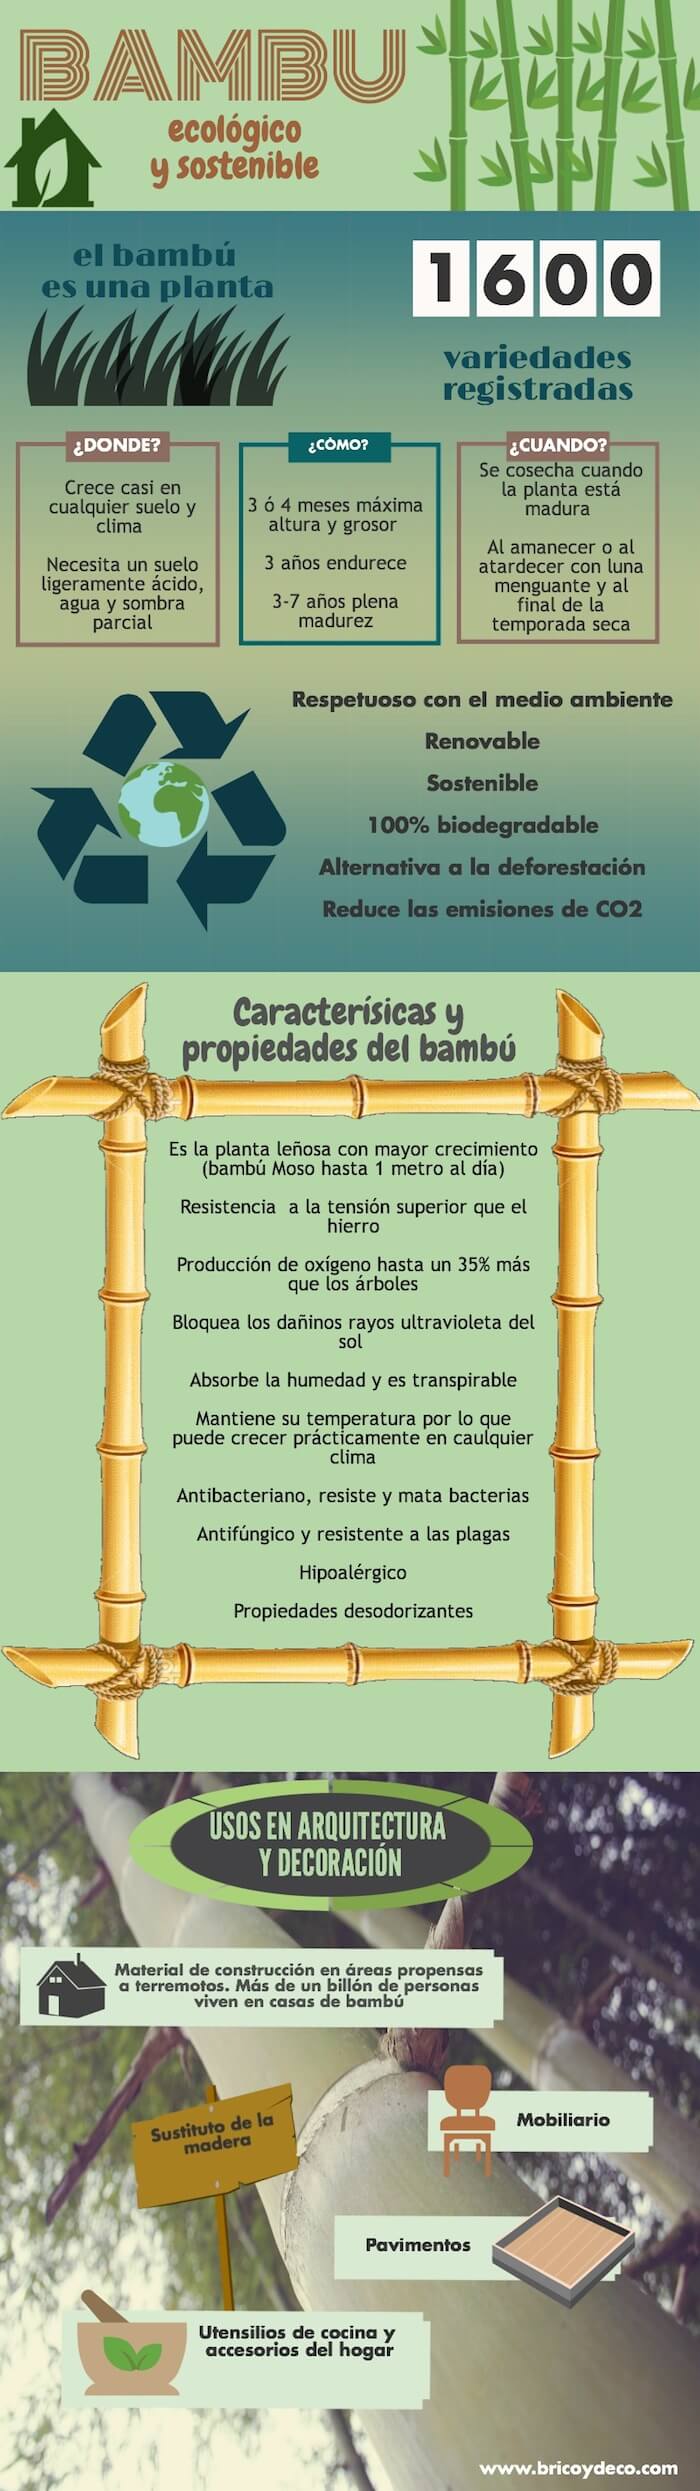 bamboo-as-ecological-material-infographic